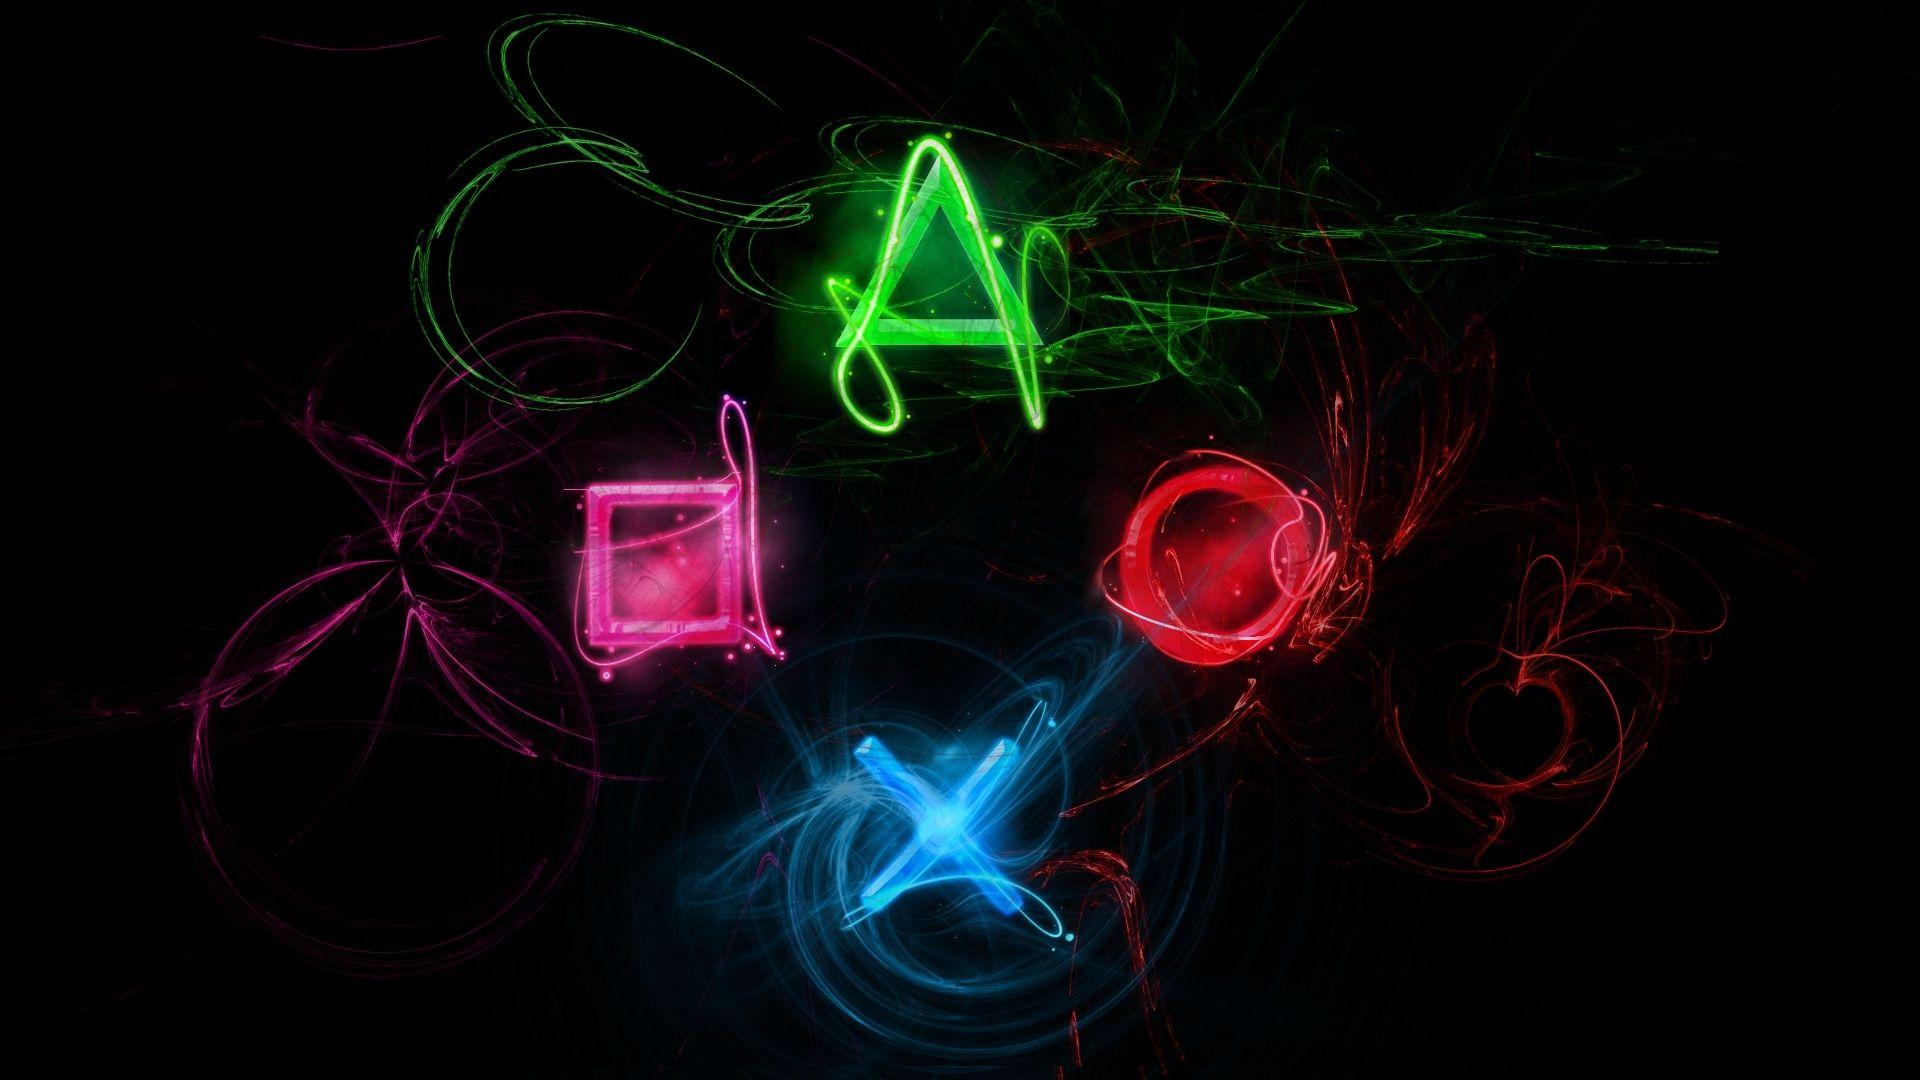 Top Playstation HQ Picture, Playstation WD 55 Wallpaper